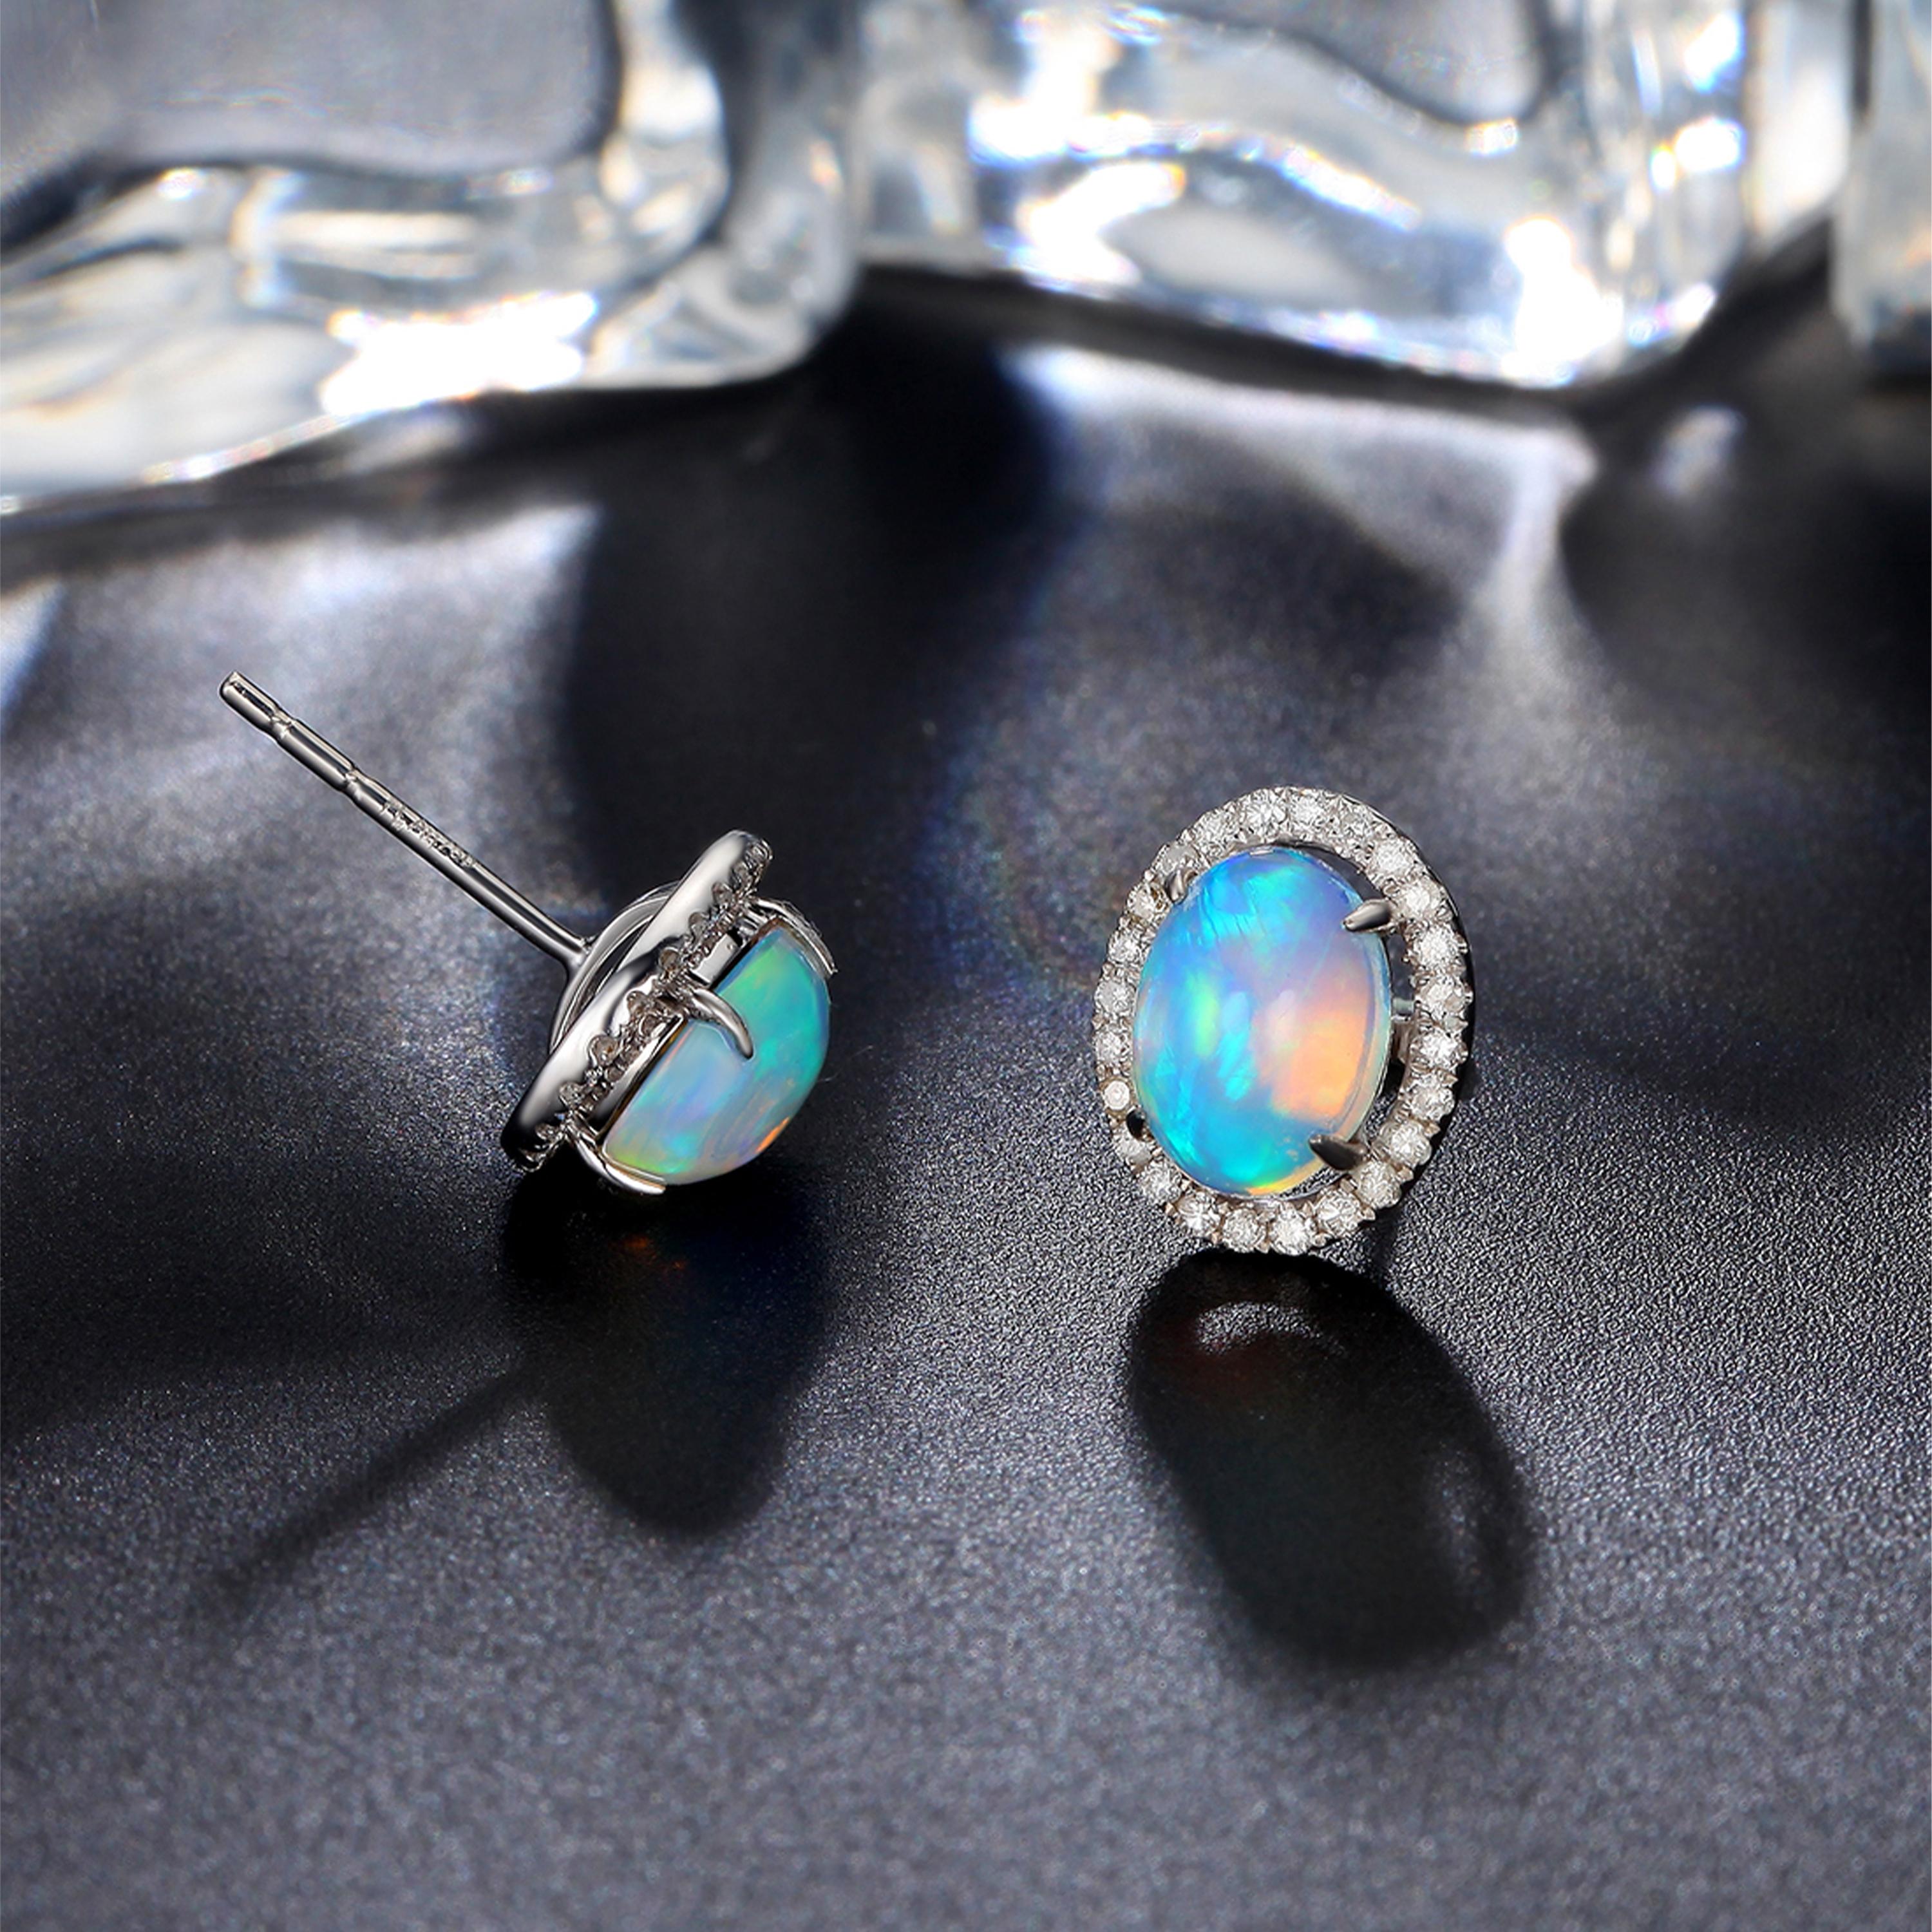 Soft chromatic stud earrings with a classic touch. Yet, an energy of colour to keep you glowing throughout the day and through the night. 

Oval opal stud earrings featuring 1.87ct iridescent opals bordered with shimmering 0.24ct diamonds, set in